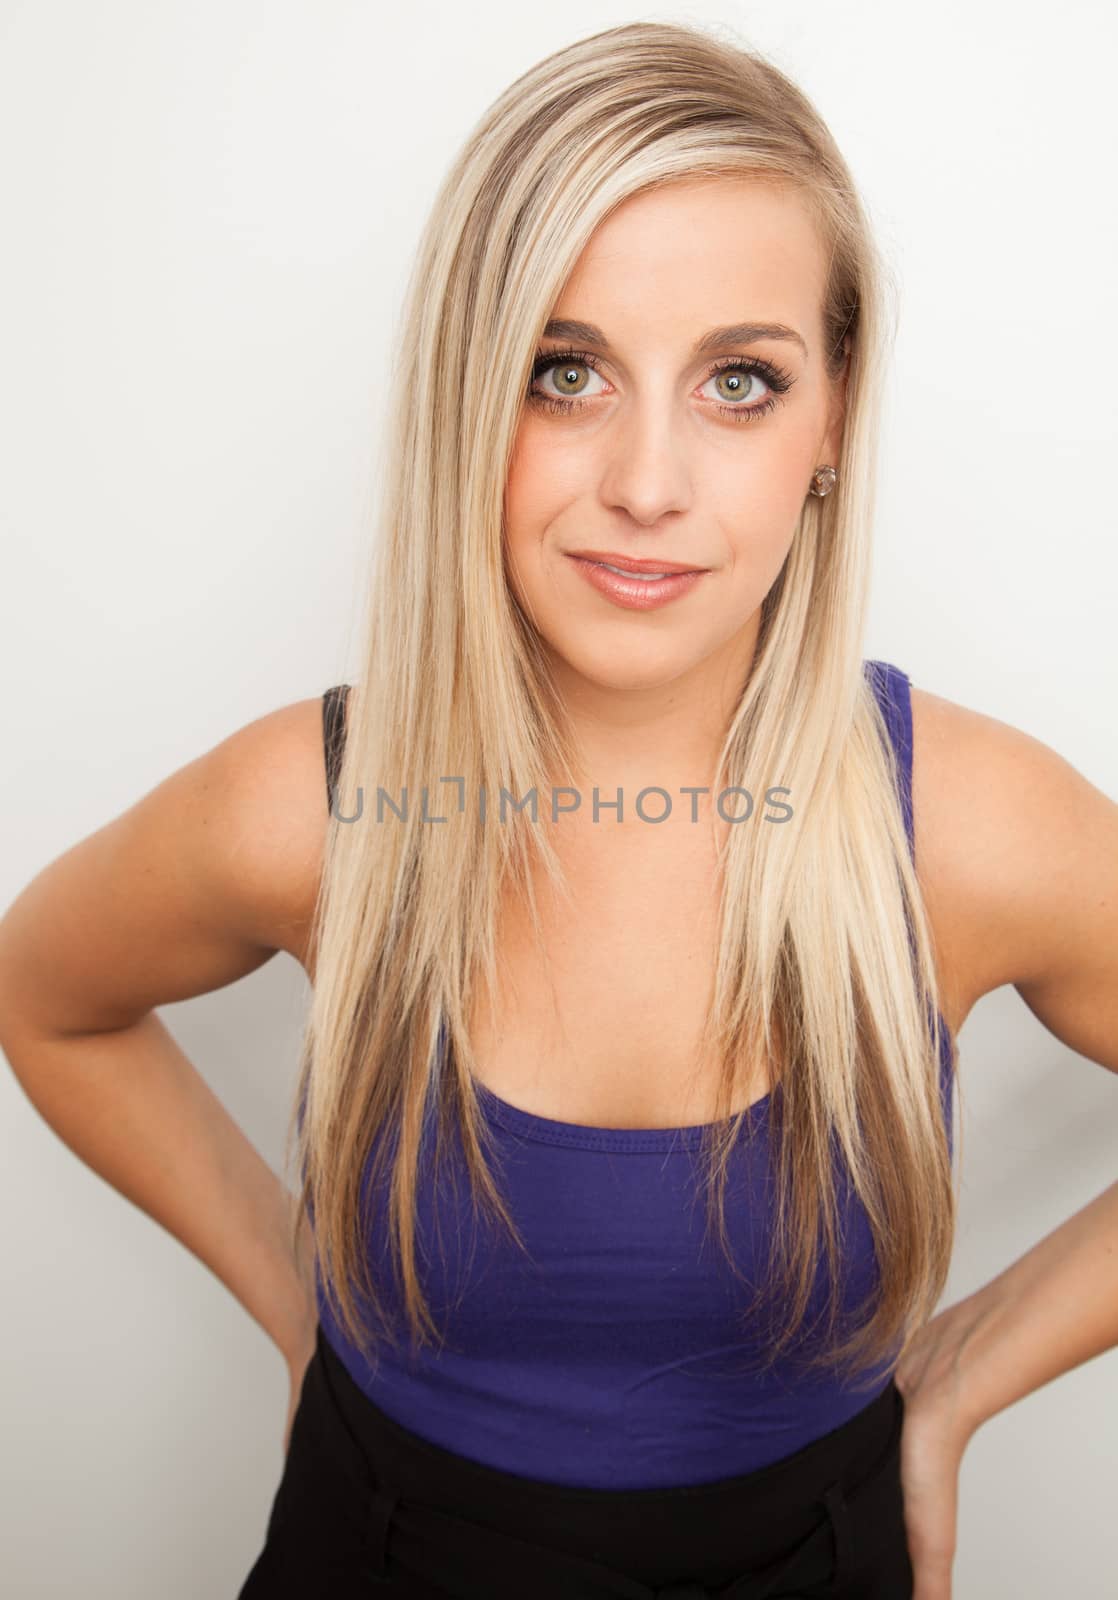 Portrait of a young blond woman smiling by Izaphoto